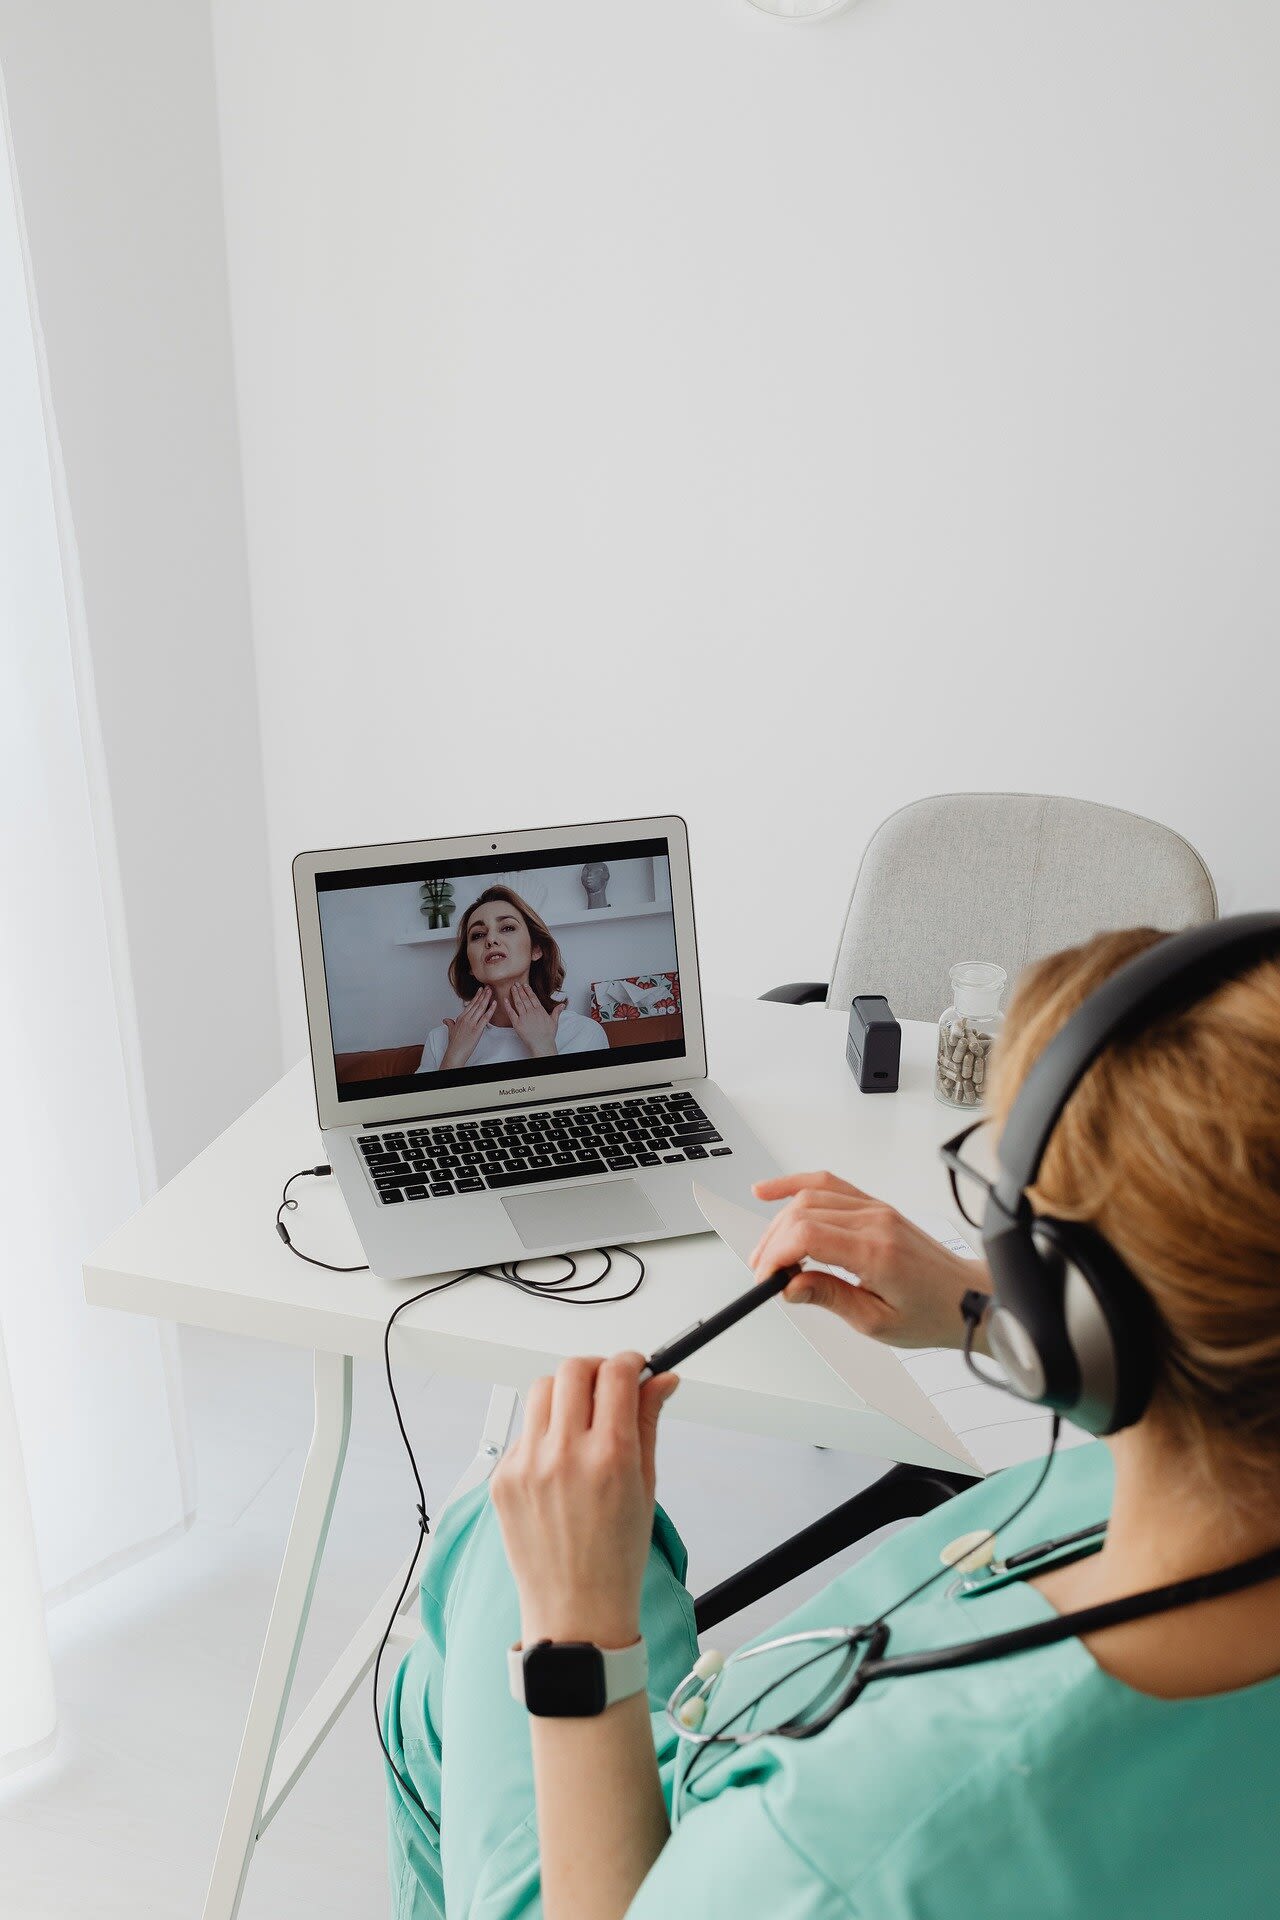 Study finds patients with limited English proficiency have poorer experiences with virtual health care